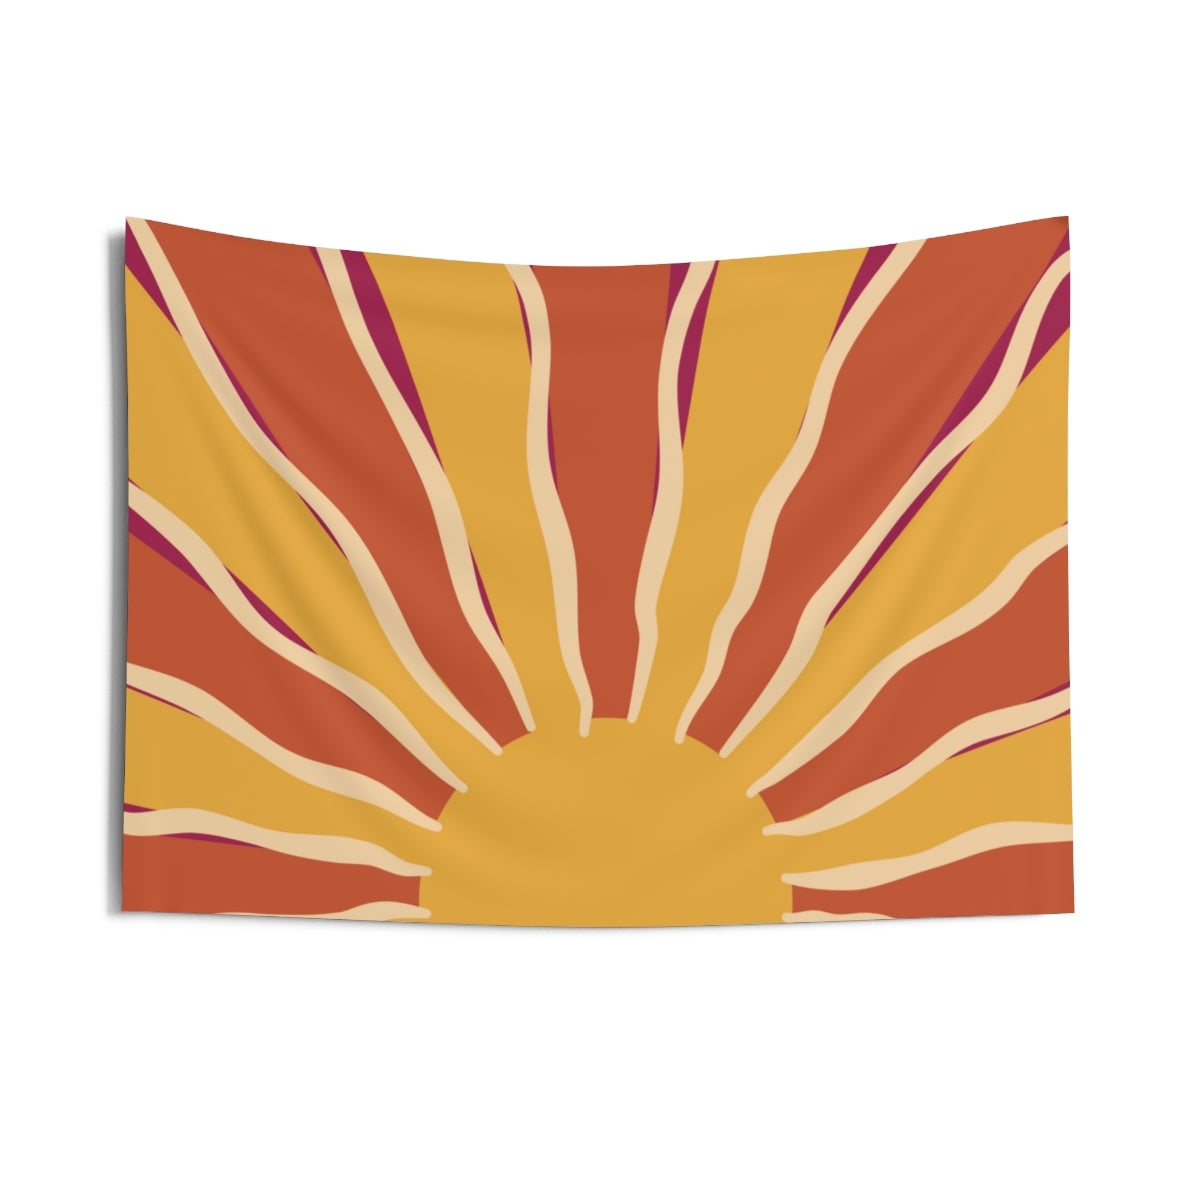 Groovy Sunburst Tapestry, Retro Sun 70s Vintage 1970s Landscape Wall Aesthetic Art Hanging Large Small Decor College Dorm Gift Starcove Fashion